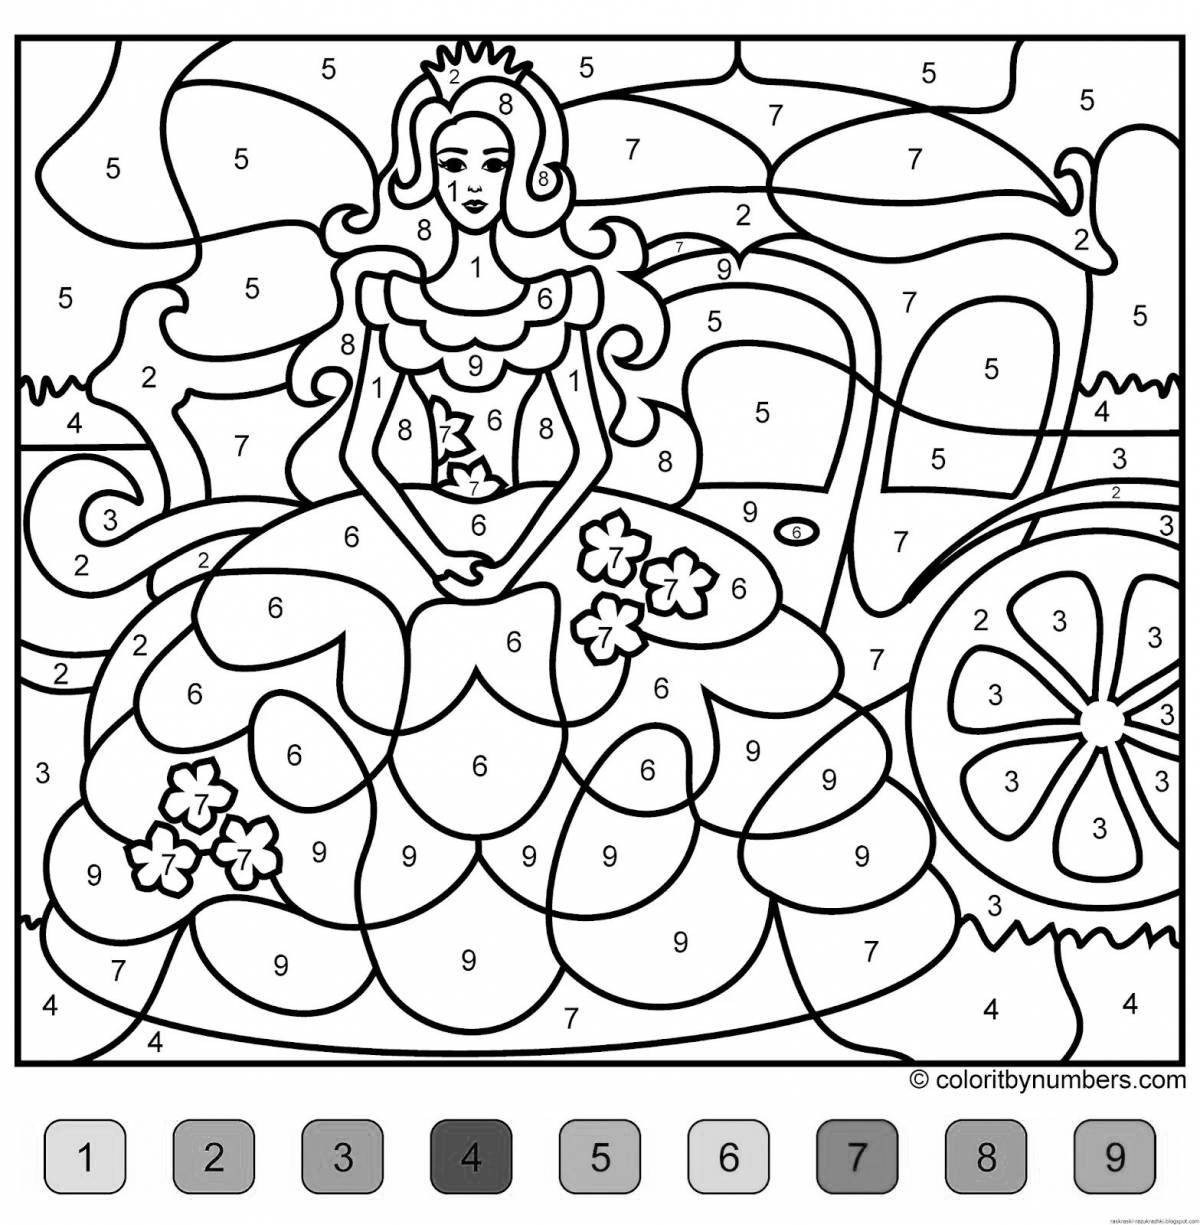 Live coloring game for 10 year old girls